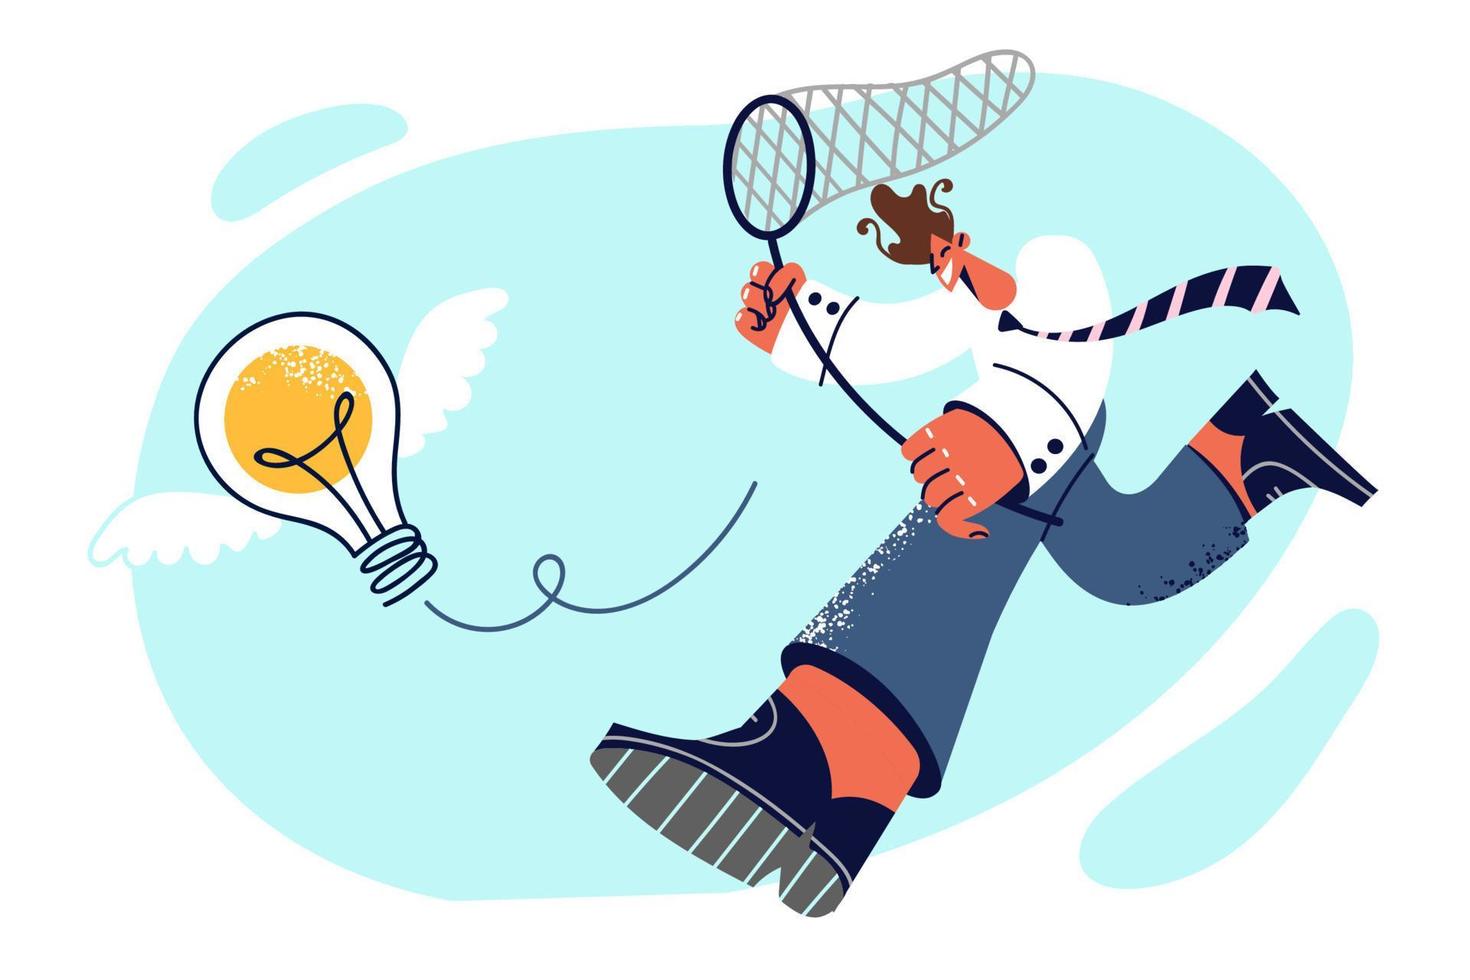 Man in business clothes with butterfly net runs after light bulb with wings, symbolizing search for new ideas. Search non-standard ideas for business and entrepreneurial imagination concept vector